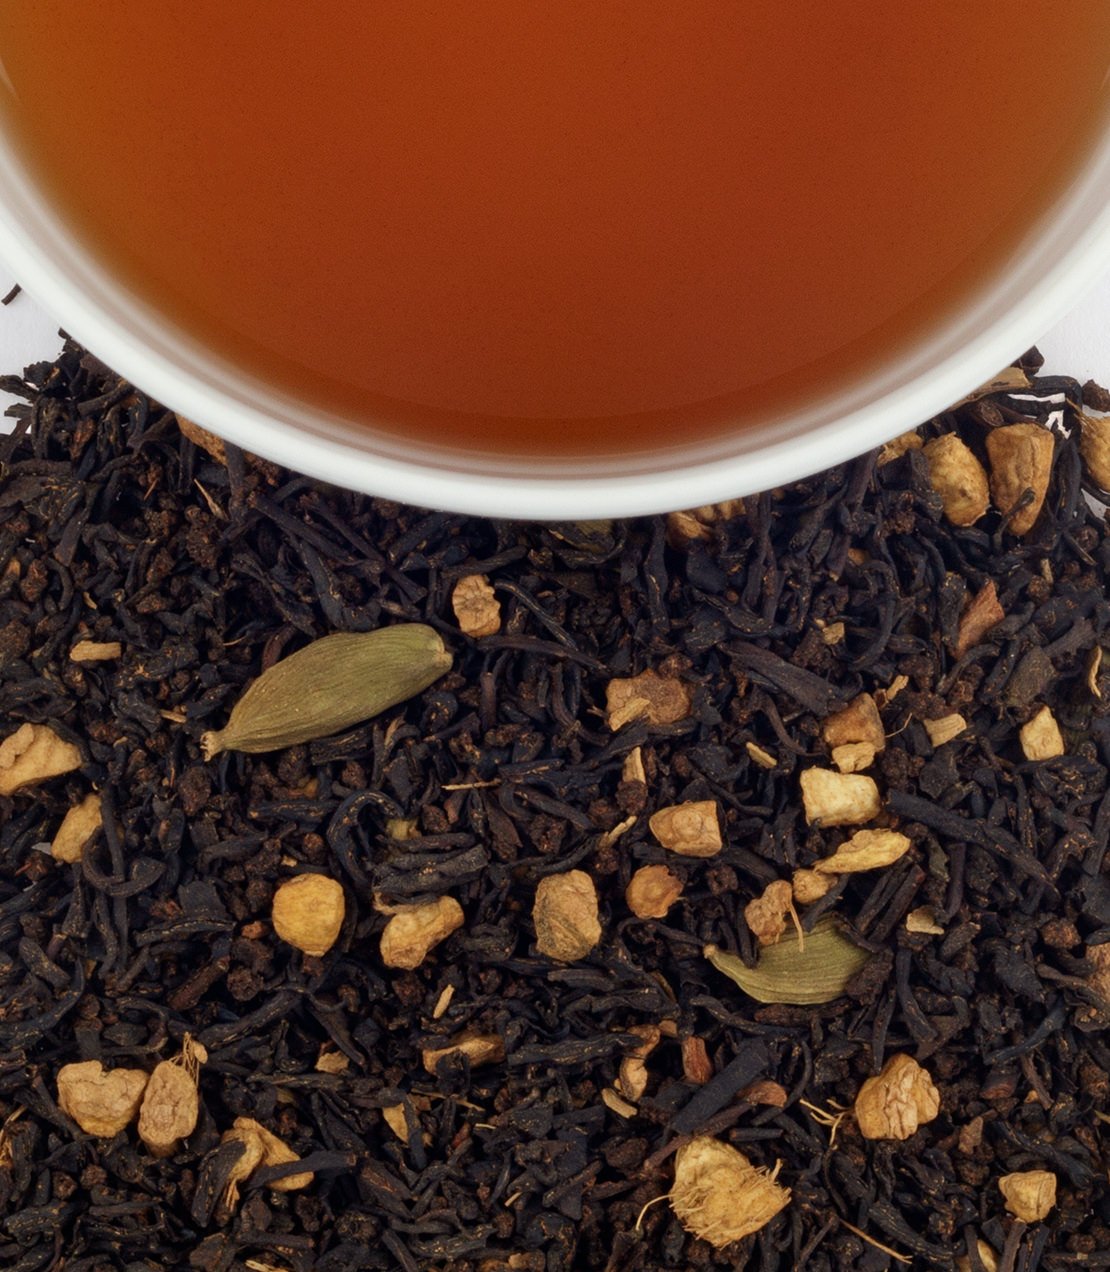 Black tea with spices and chocolate flavour -Chocolate Chai Supreme by Harney & Sons Fine Teas Europe